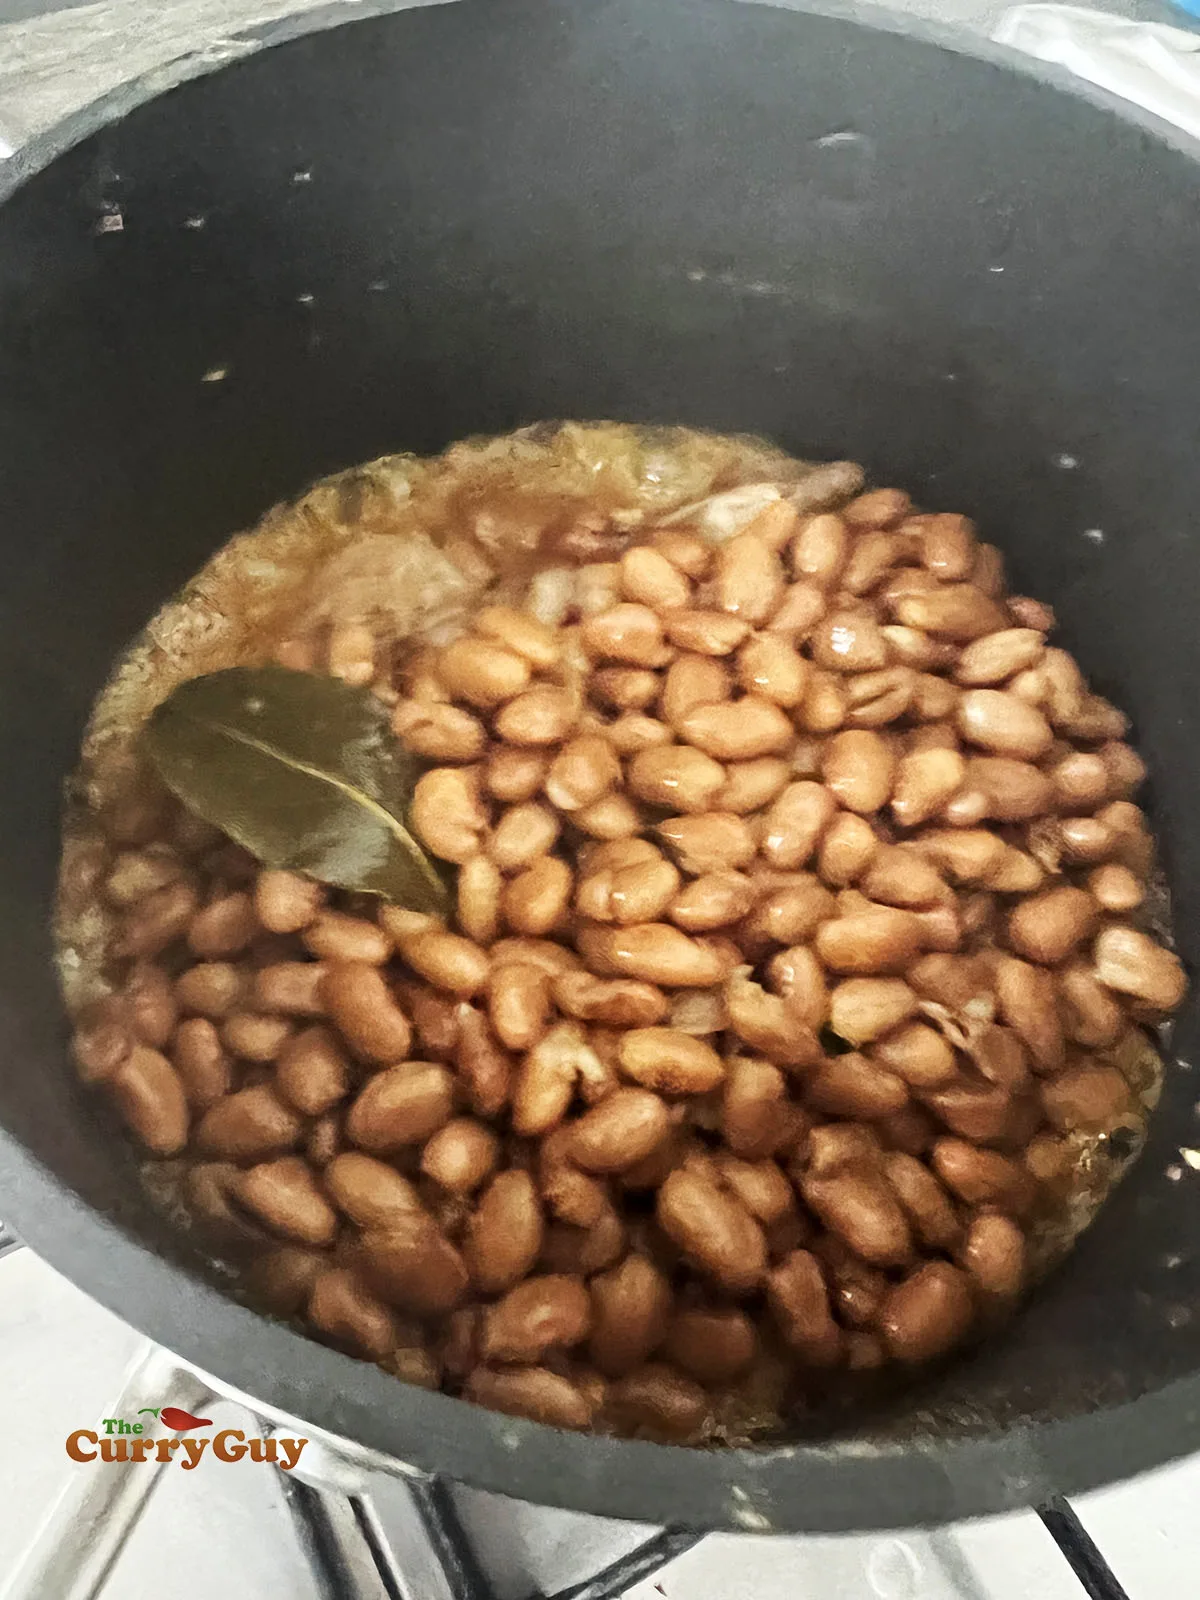 Cooking the beans in pork lard.